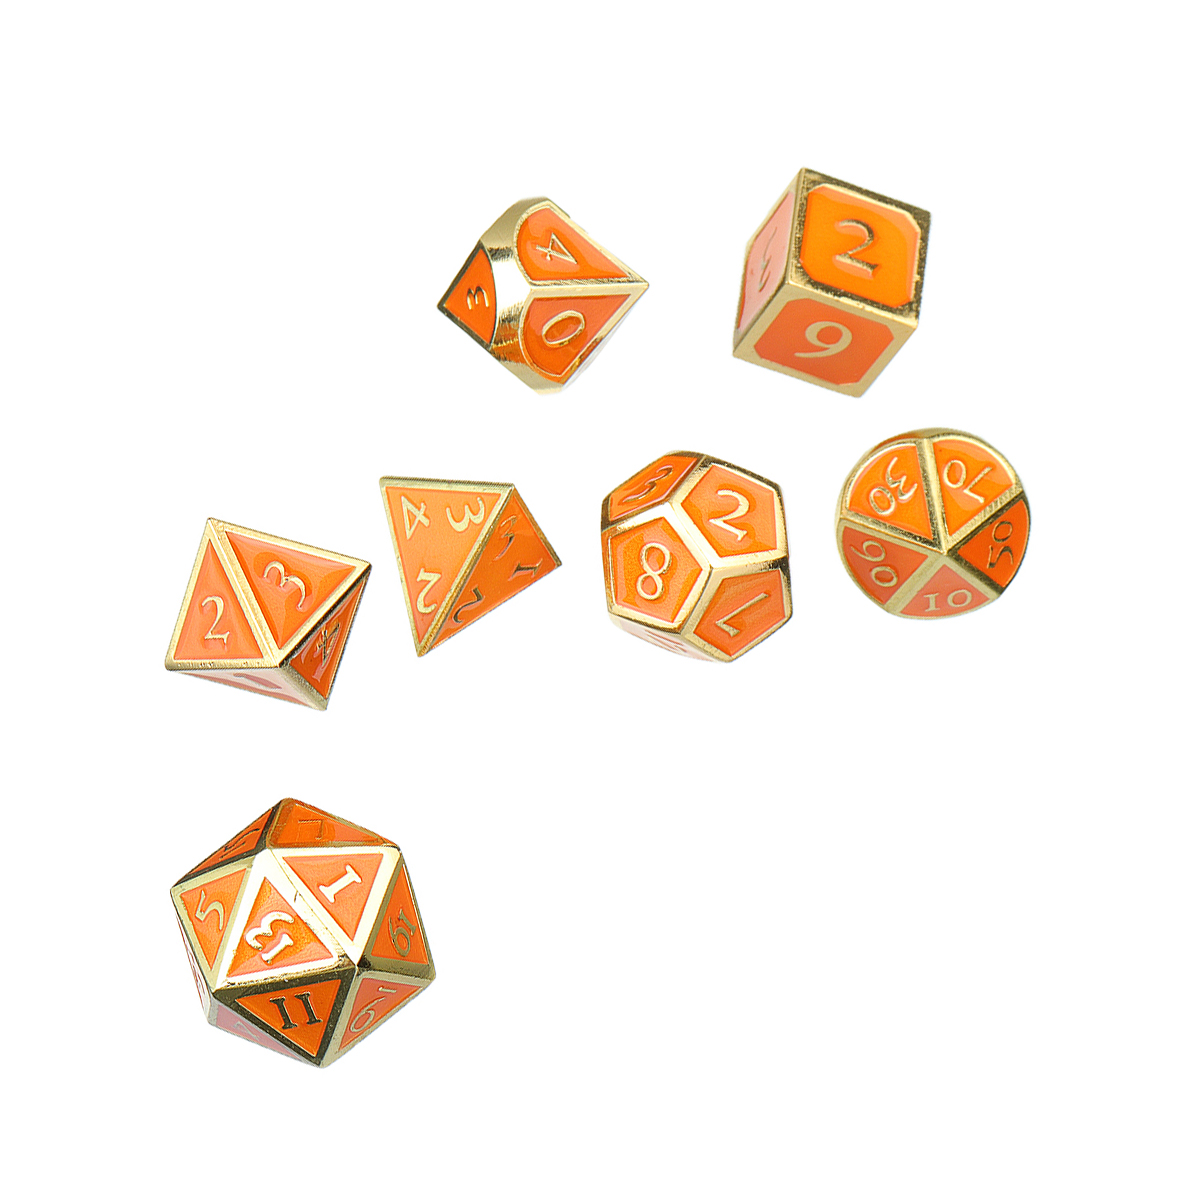 Solid-Metal-Heavy-Dice-Set-Polyhedral-Dices-Role-Playing-Games-Dice-Gadget-RPG-1391317-5